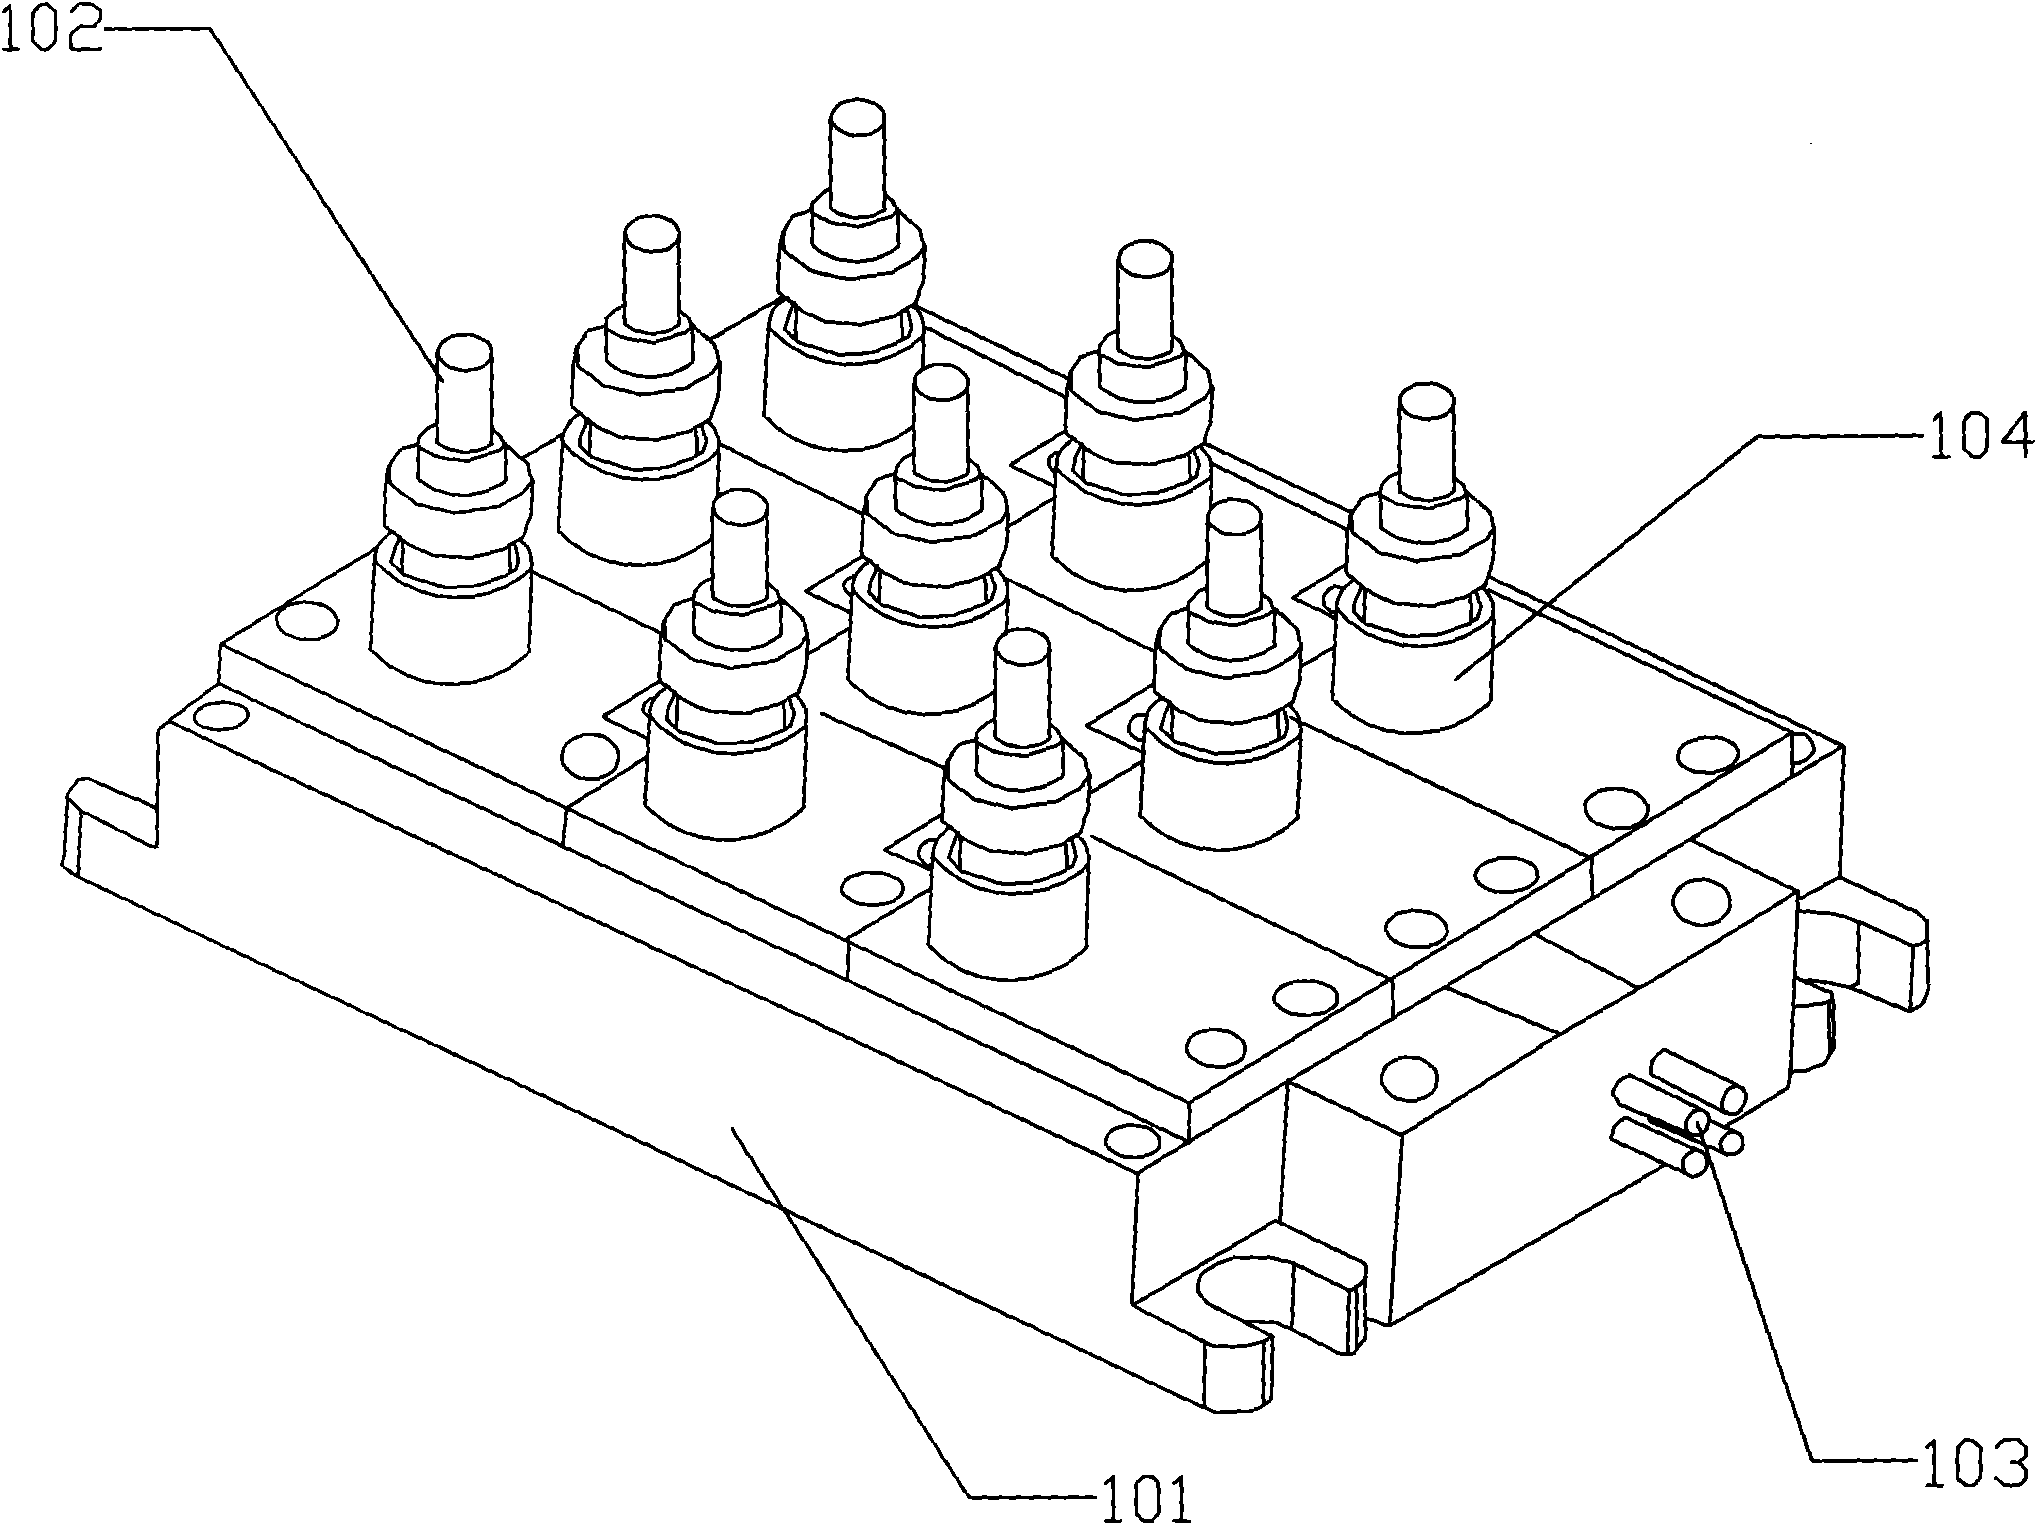 Vertical fiber coupling module with multiple semiconductor lasers